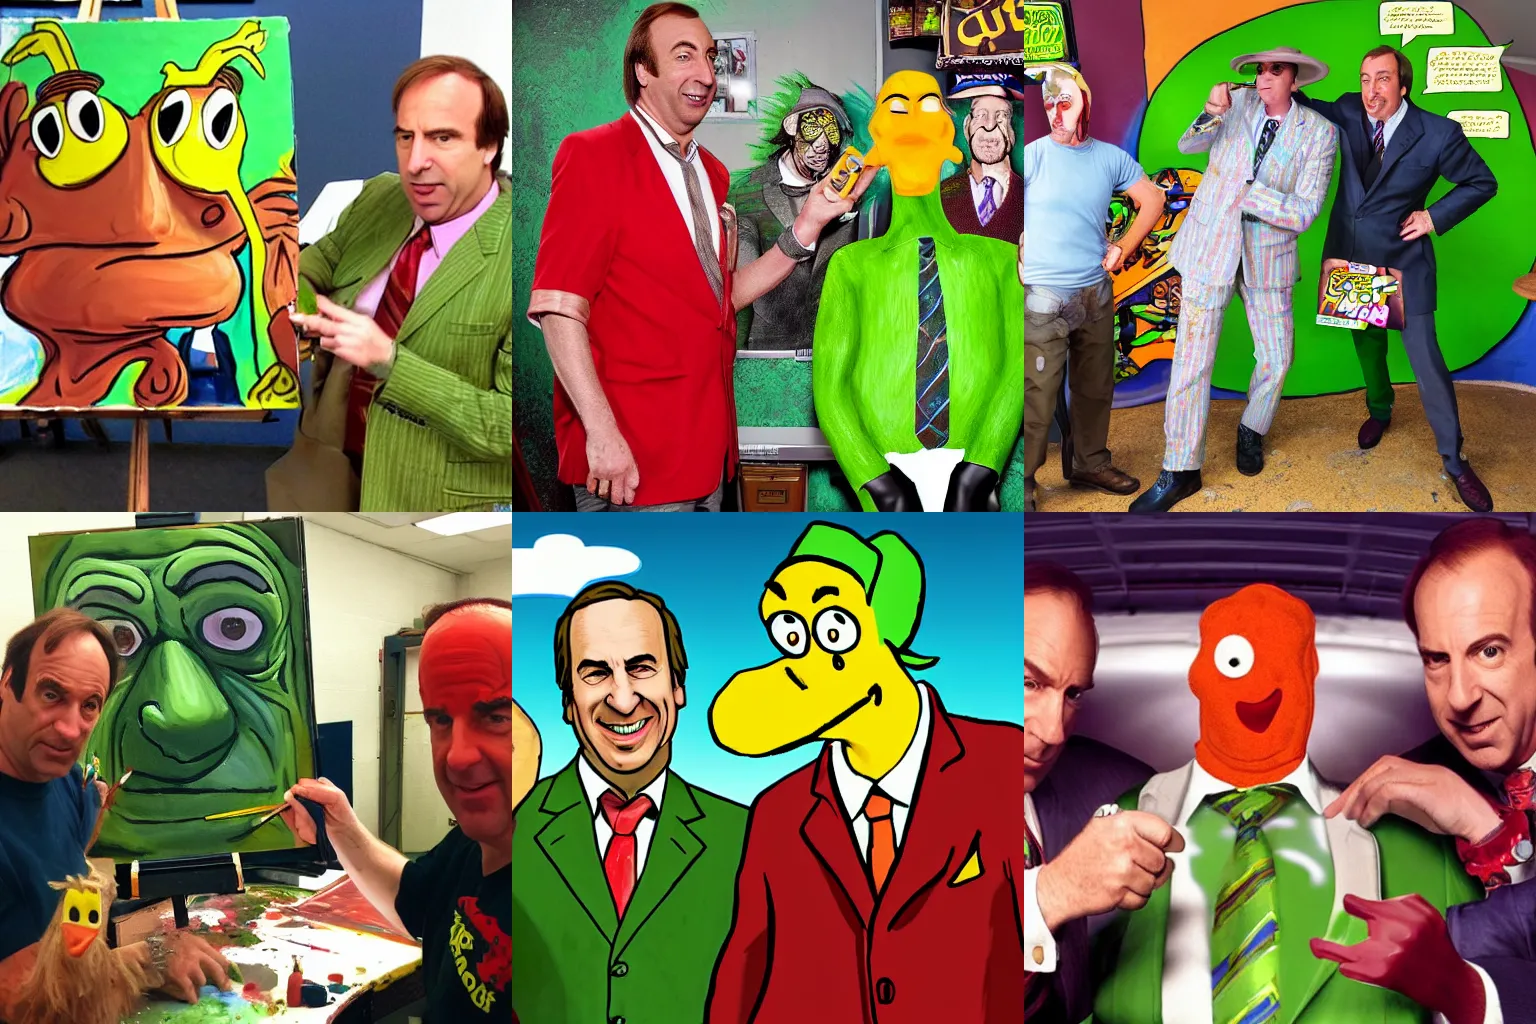 Prompt: Saul goodman being painted green by toejam and earl